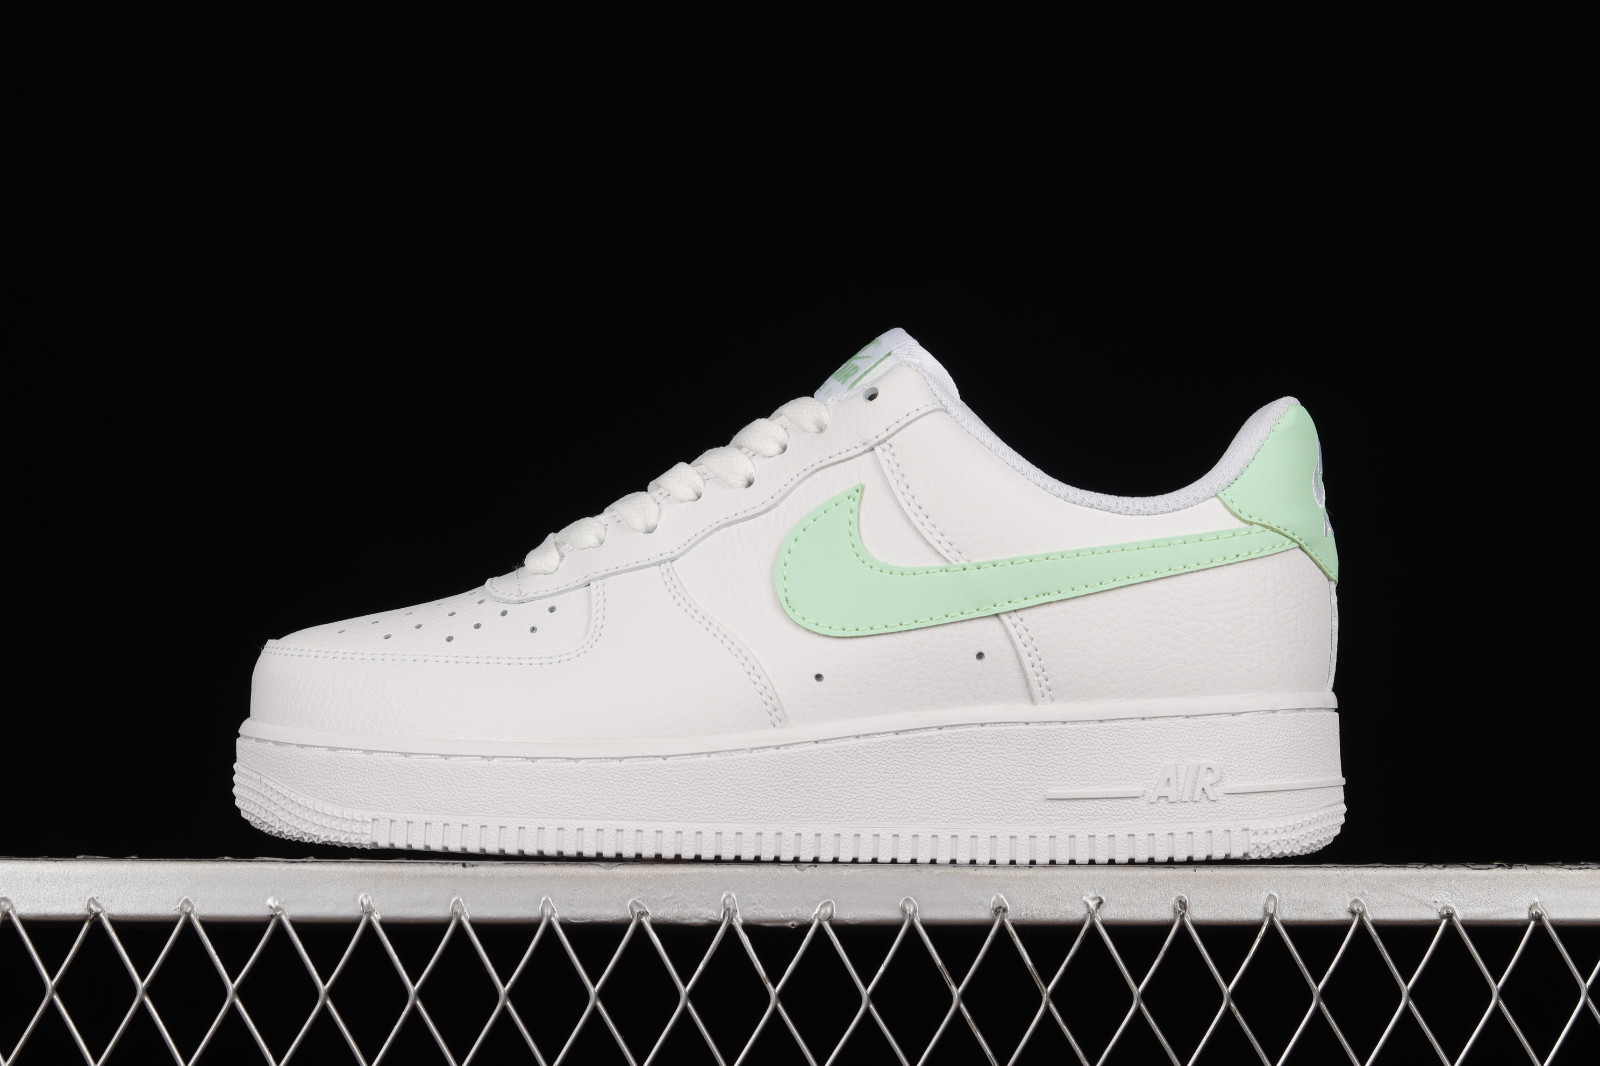 Regeneration tilstødende Magnetisk nike air span 2 on feet and ankle shoes size guide - Nike Air Force 1 07  Low White Light Green CT3839 - MultiscaleconsultingShops - 105